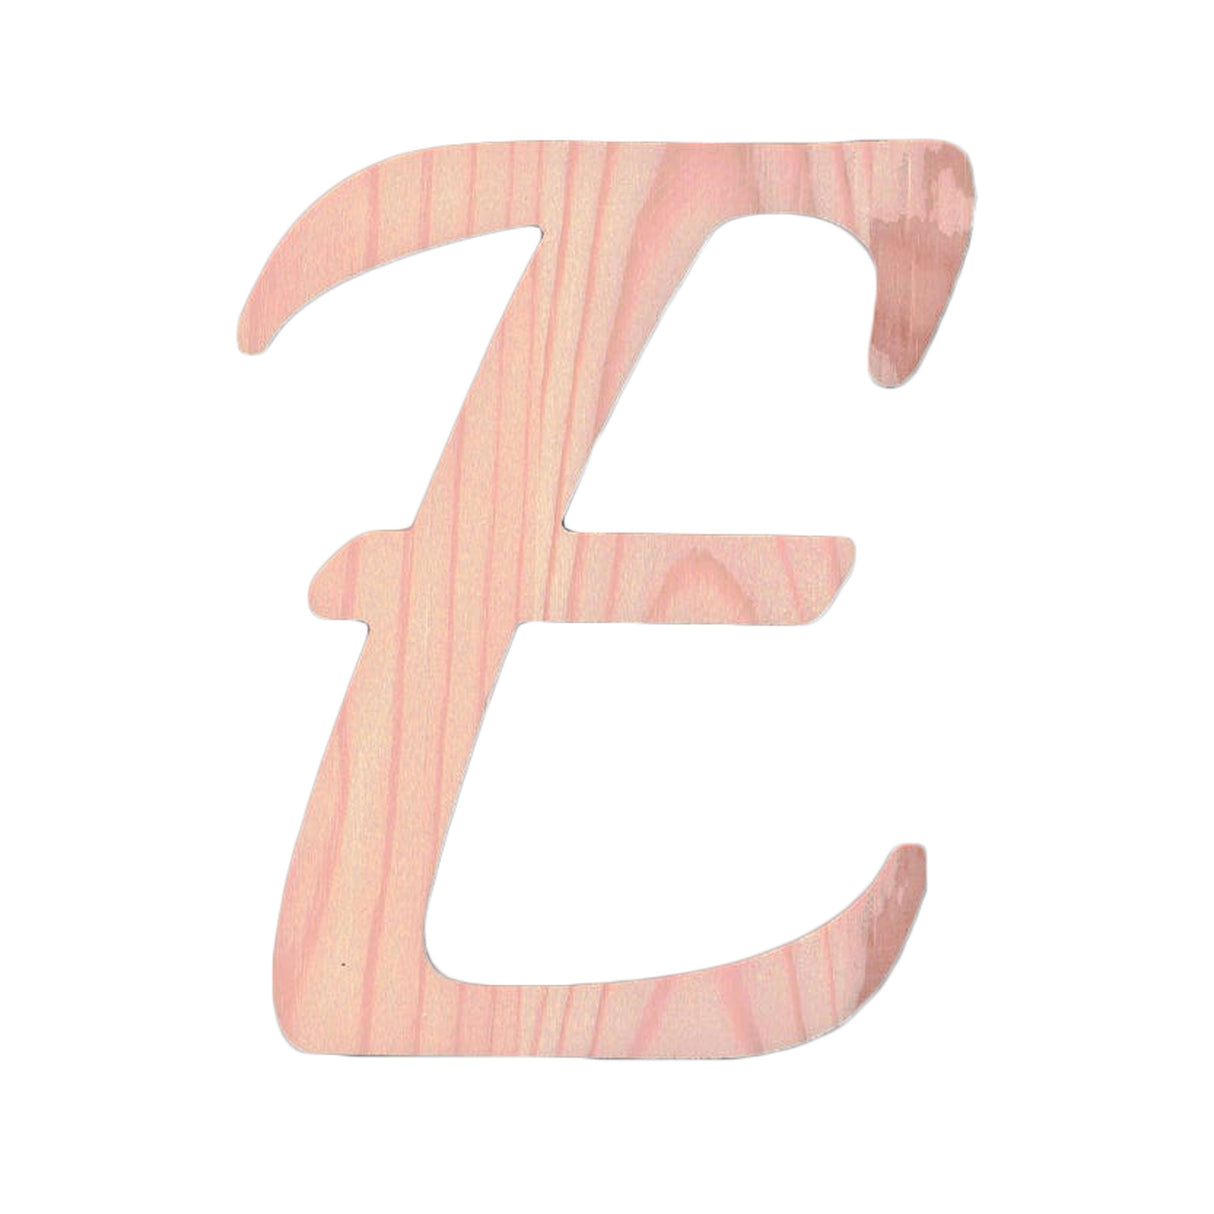 Unfinished Wooden Playball Italic Letter E (6.25 Inches) in Beige color,  shape